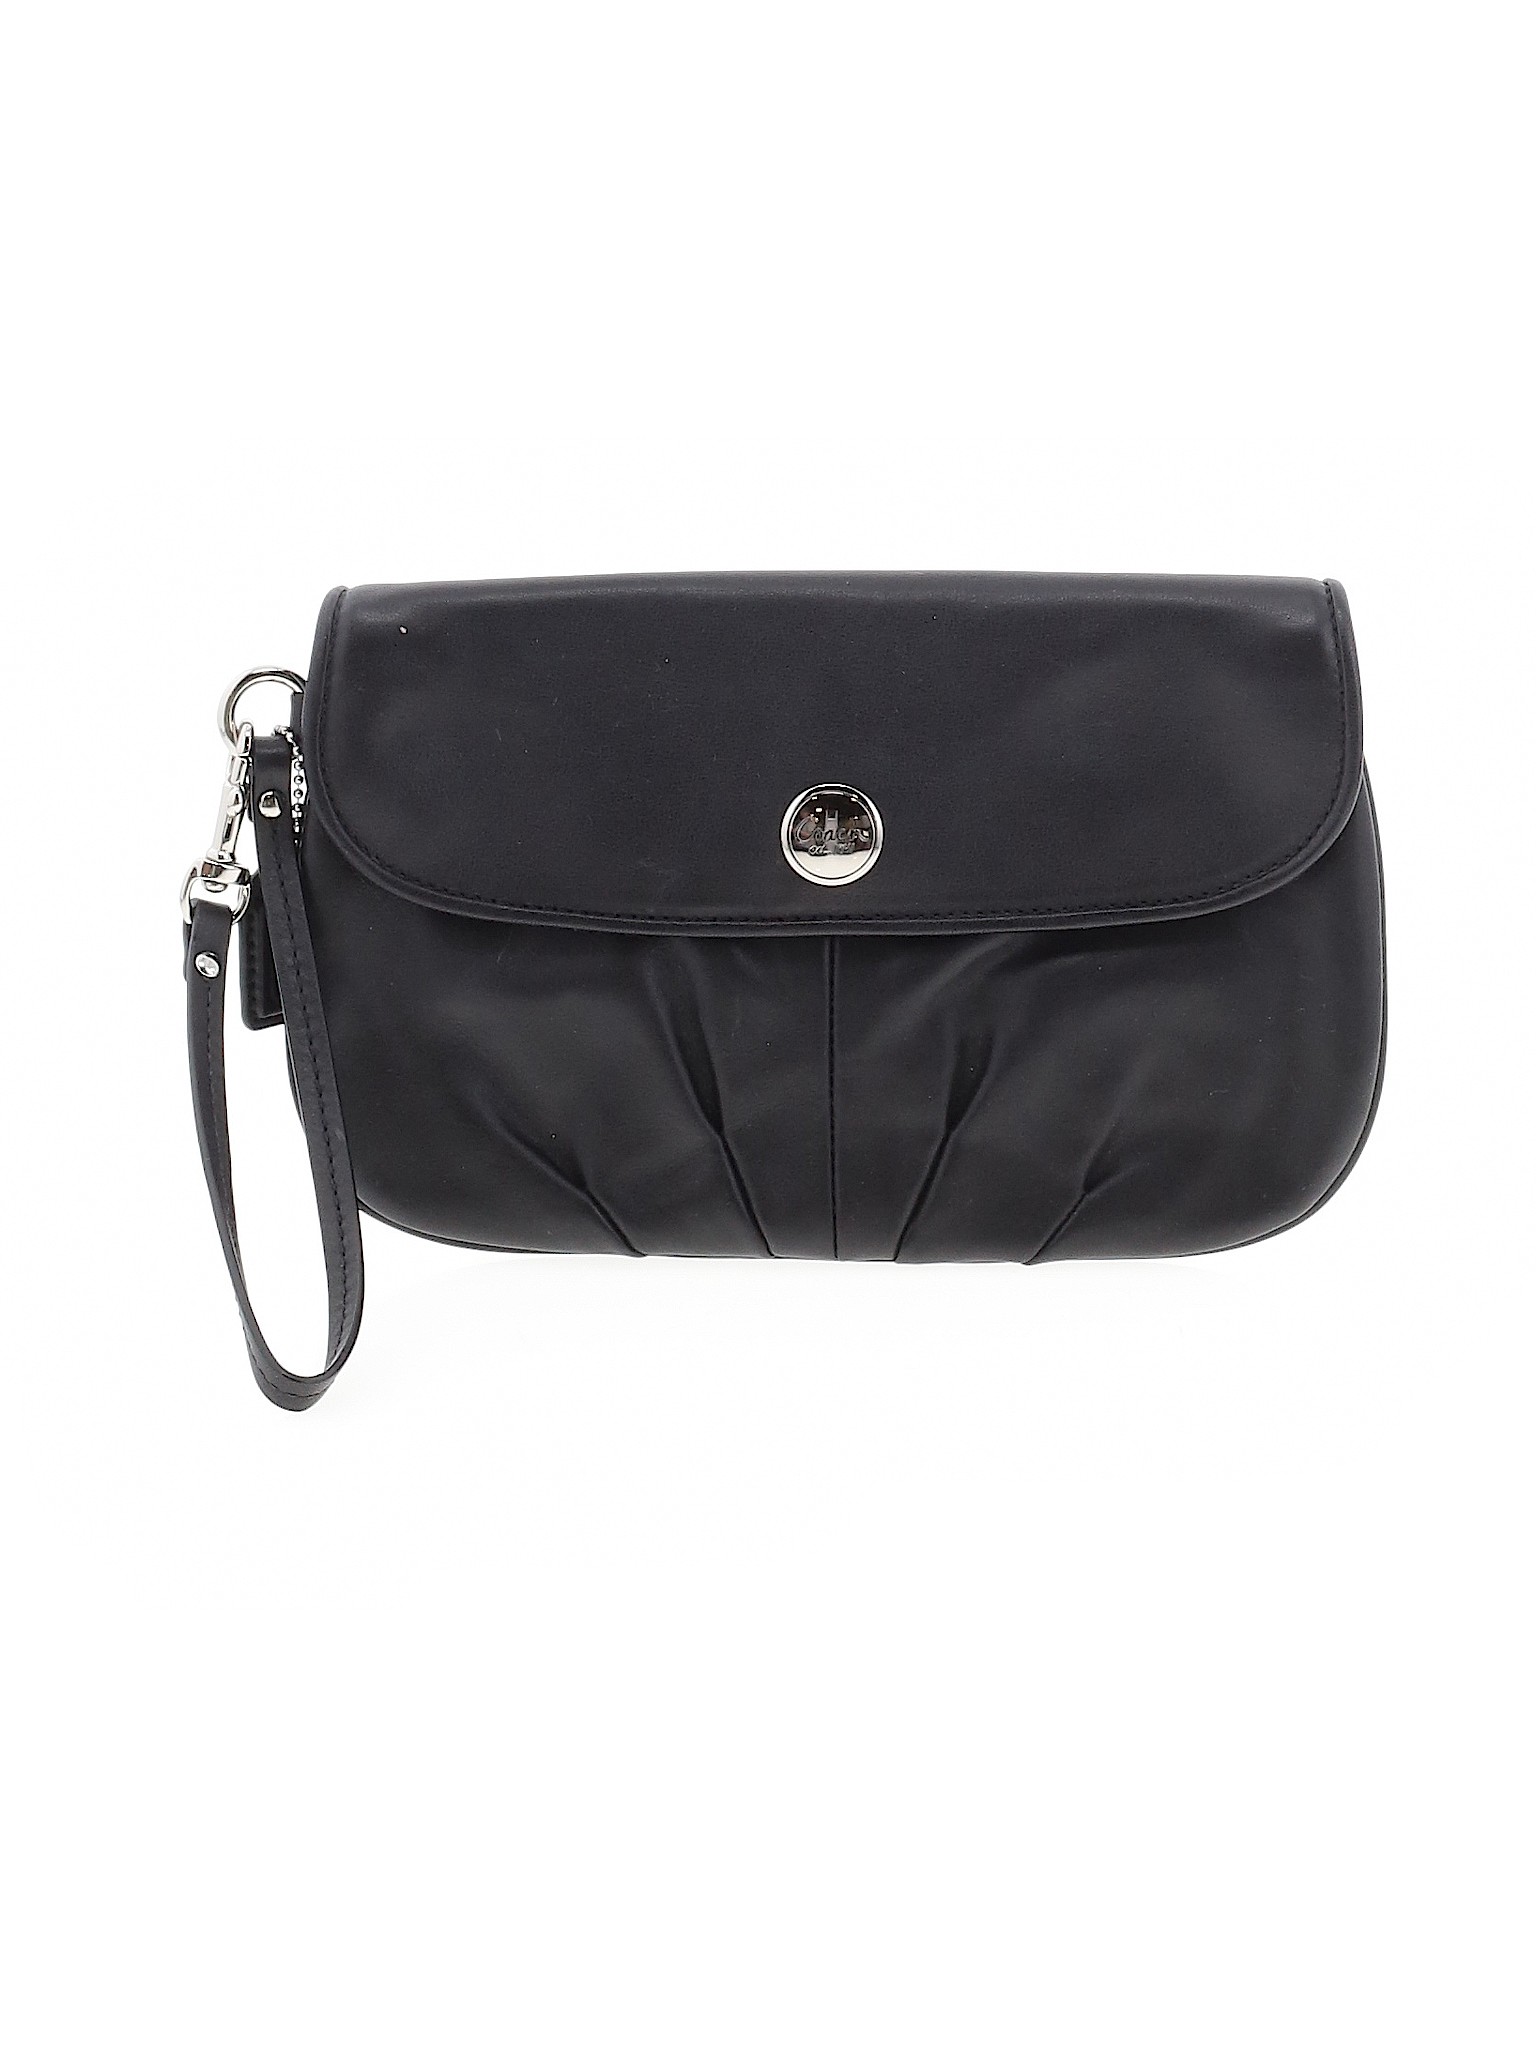 Coach Factory Solid Black Leather Wristlet One Size - 64% off | thredUP